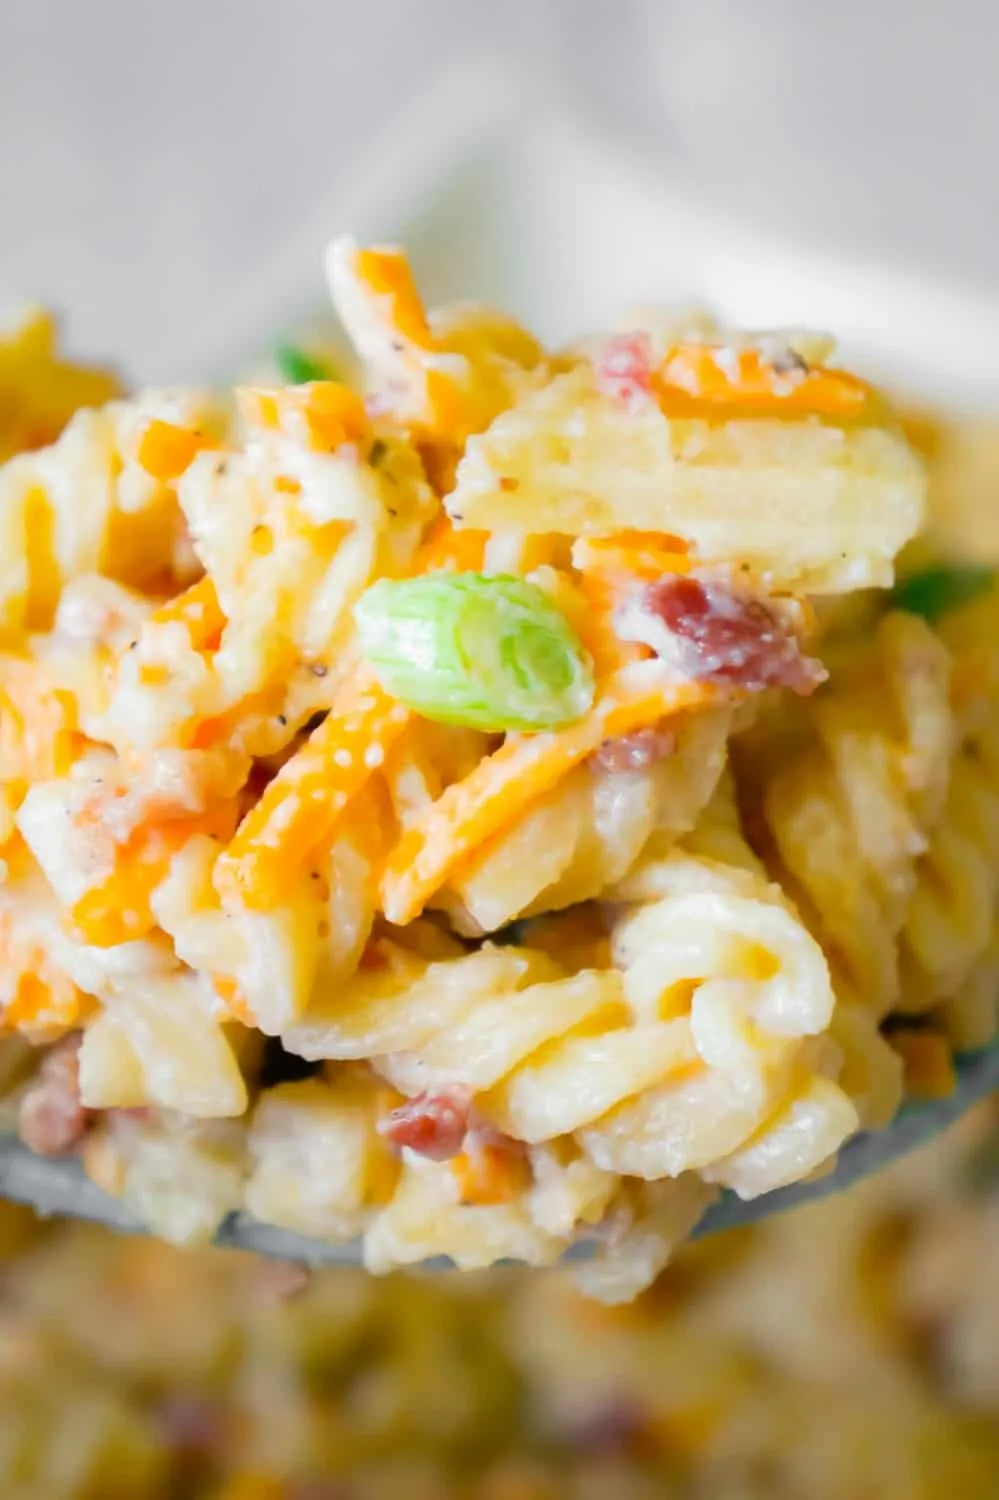 Cheddar Bacon Ranch Pasta Salad is a quick and easy cold side dish recipe perfect for summer. This creamy pasta salad is loaded with shredded cheddar cheese, bacon, green onions and crumbled potato chips.